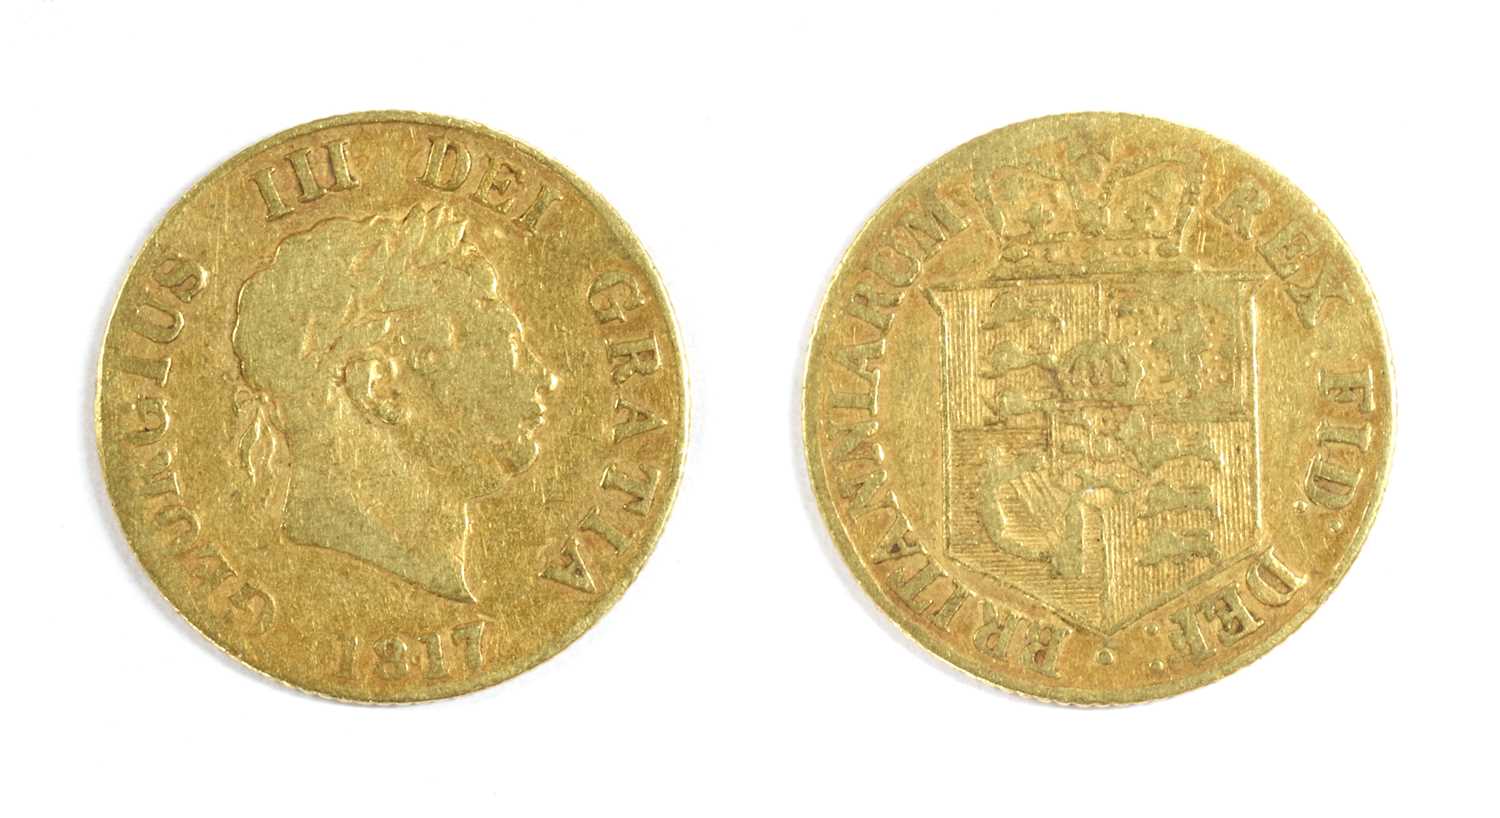 Lot 6 - Coins, Great Britain, George III (1760-1820)